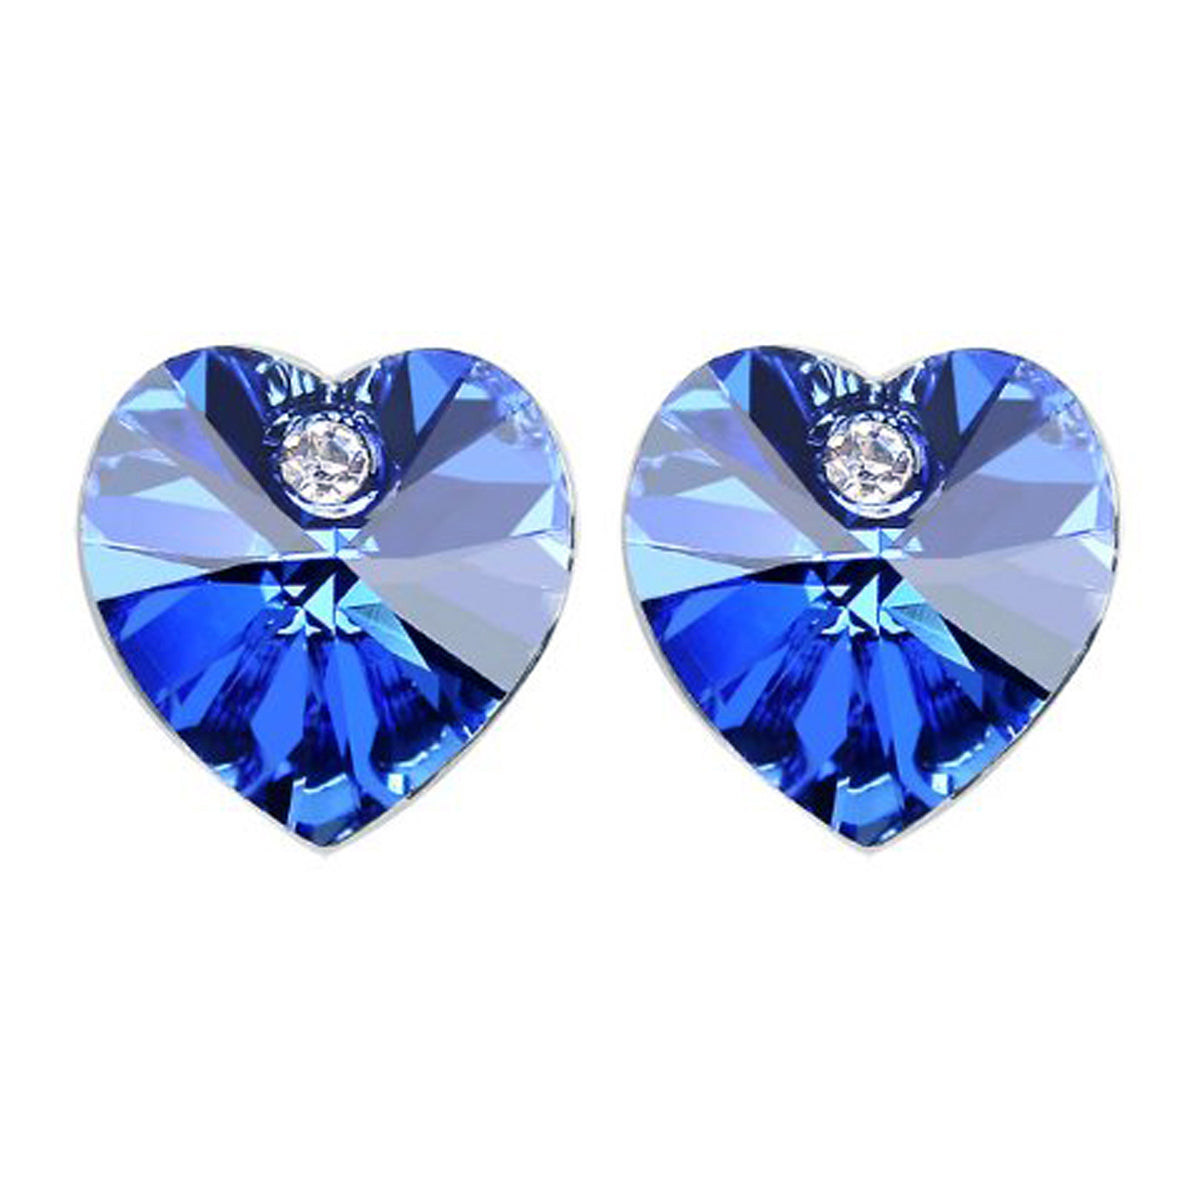 Lucky Sweethearts Gold Plated Crystal Heart Shaped Four Leaf Clover Pendant Necklace and Earrings Jewelry Set (Royal Blue)